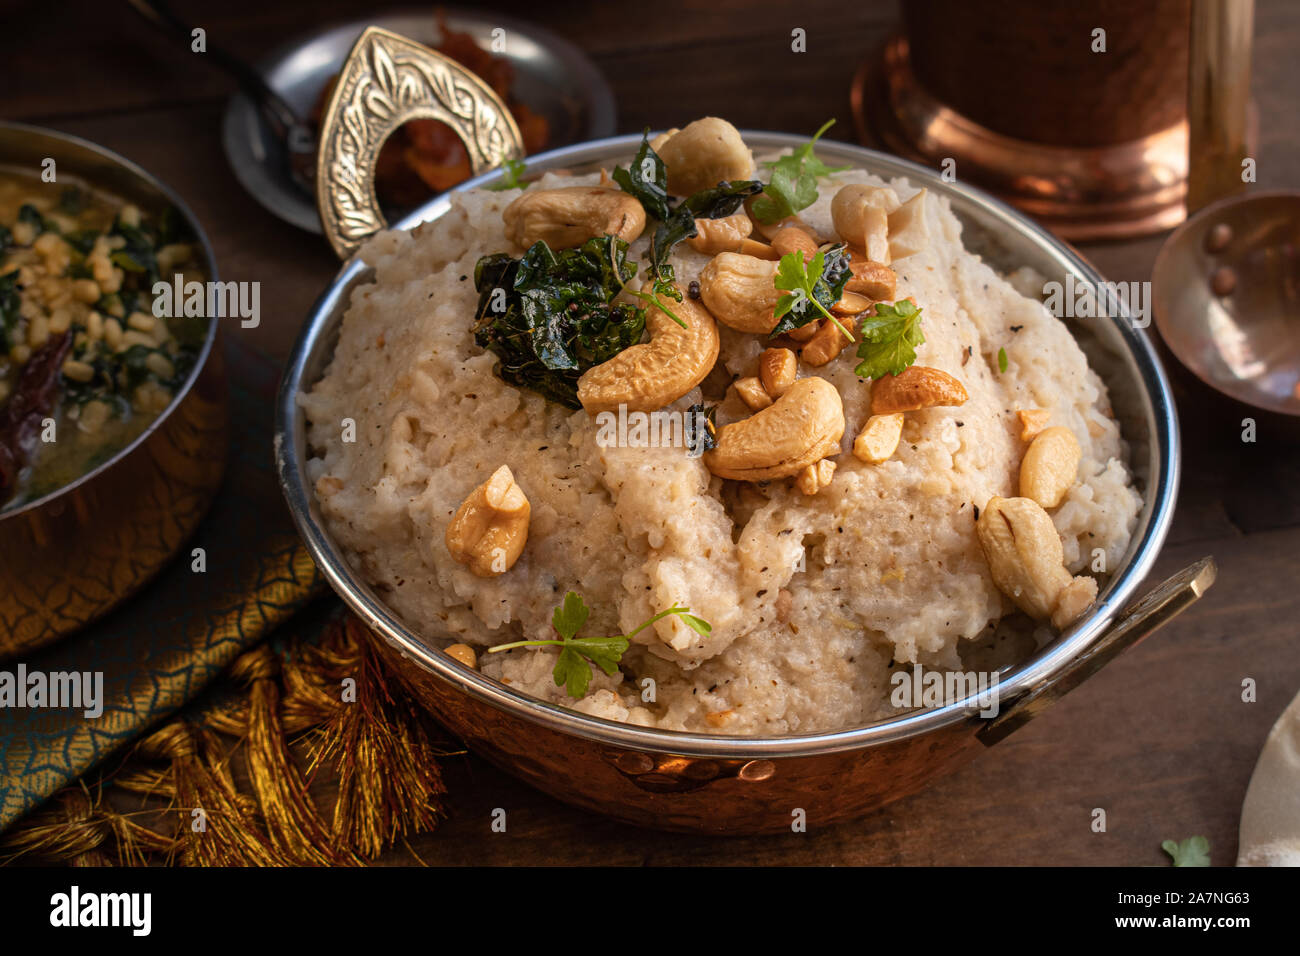 Pongal- South Indian rice and lentil porridge, spiced with black pepper, cumin, ginger, ghee and nuts Stock Photo